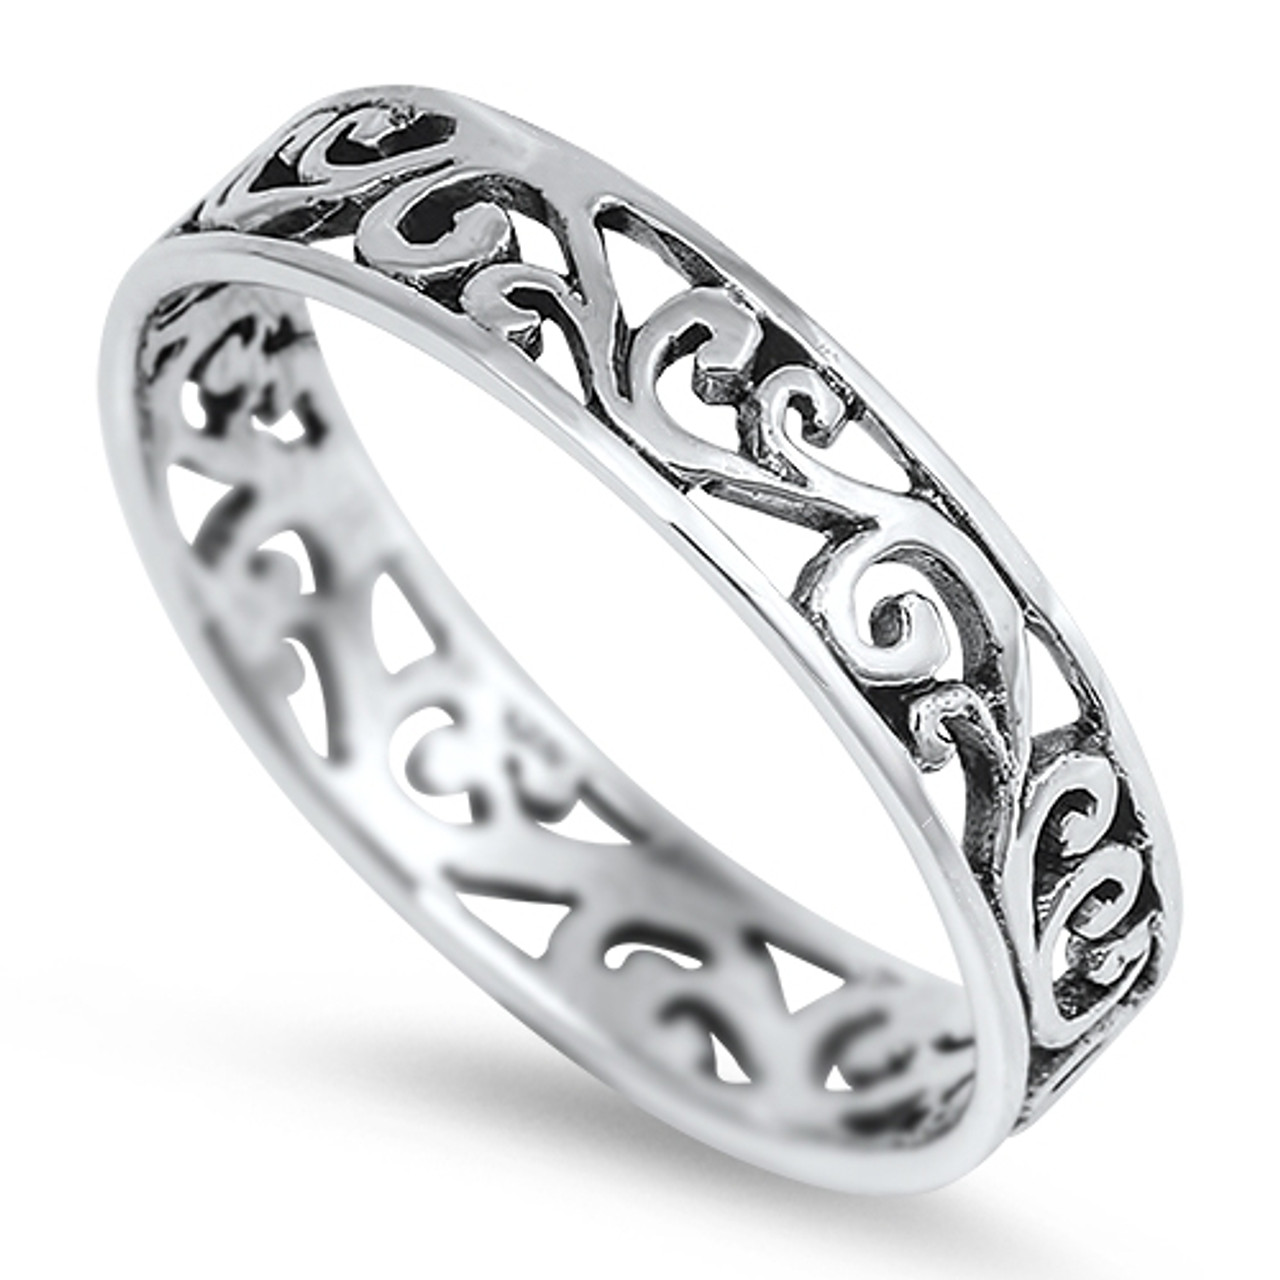 Cute Snake Rings Adjustable Wrap Open Ring,925 Sterling Silver Thumb R